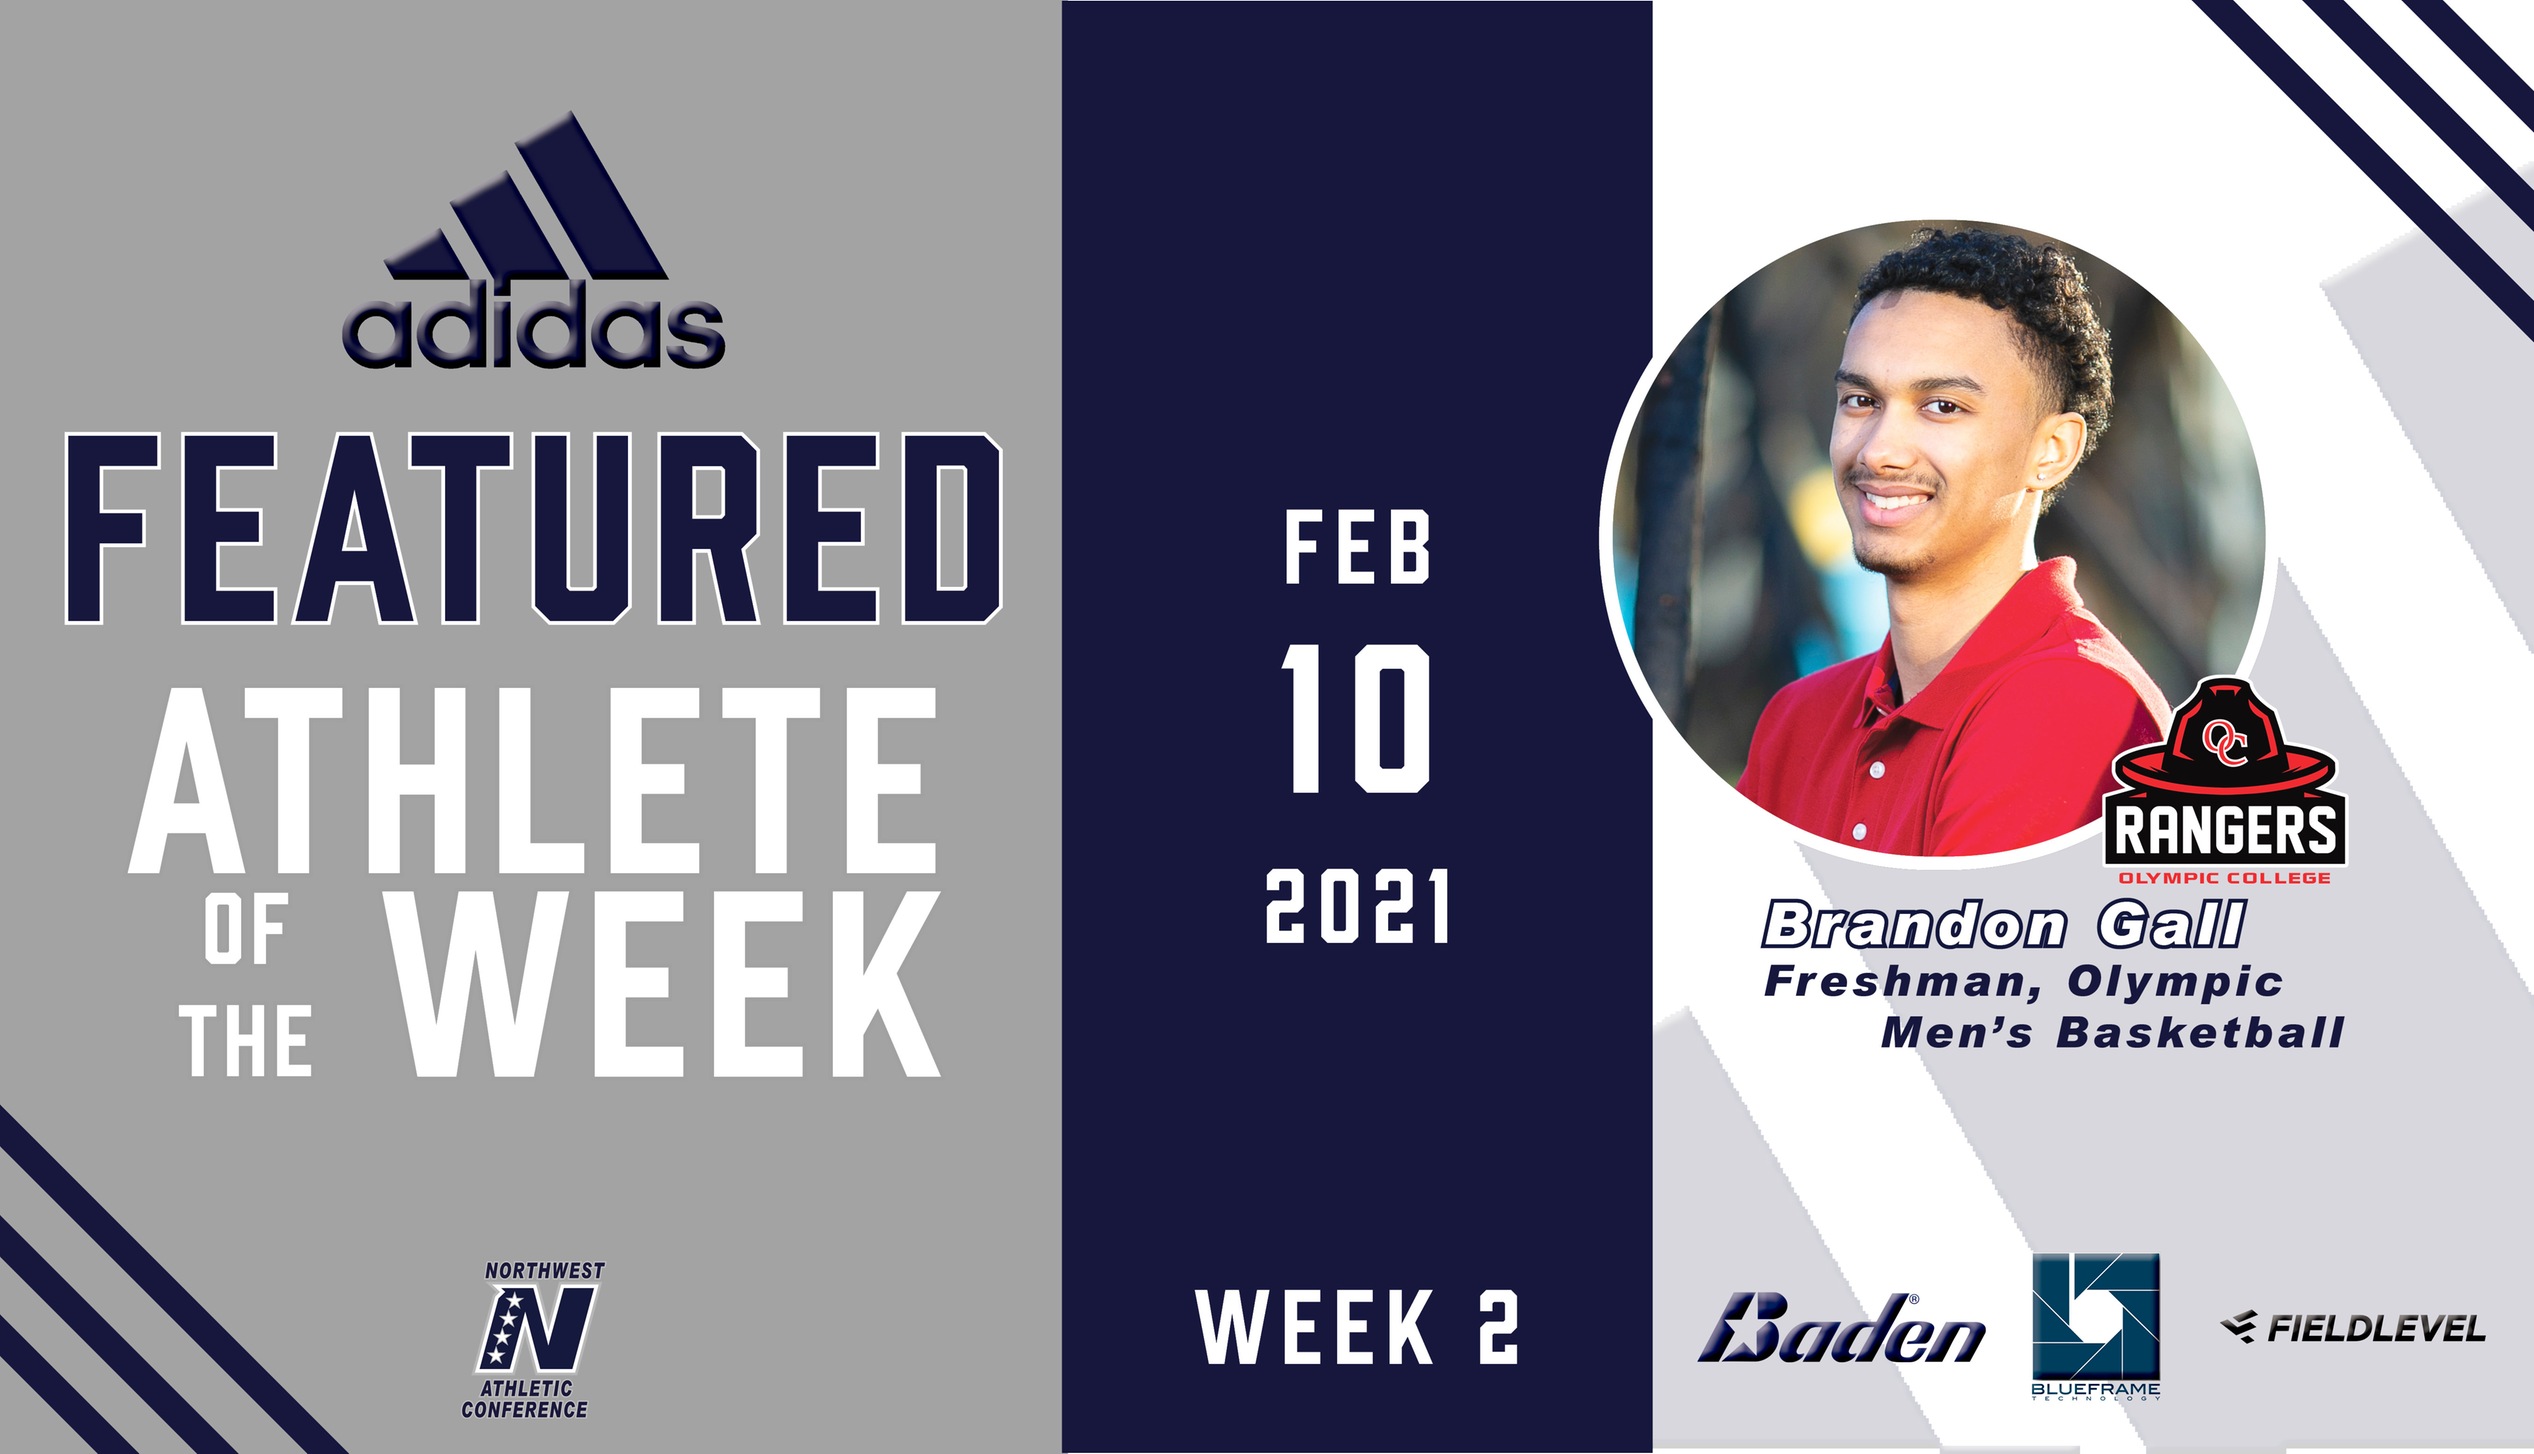 Featured Athlete of the Week graphic with image of Brandon Gall